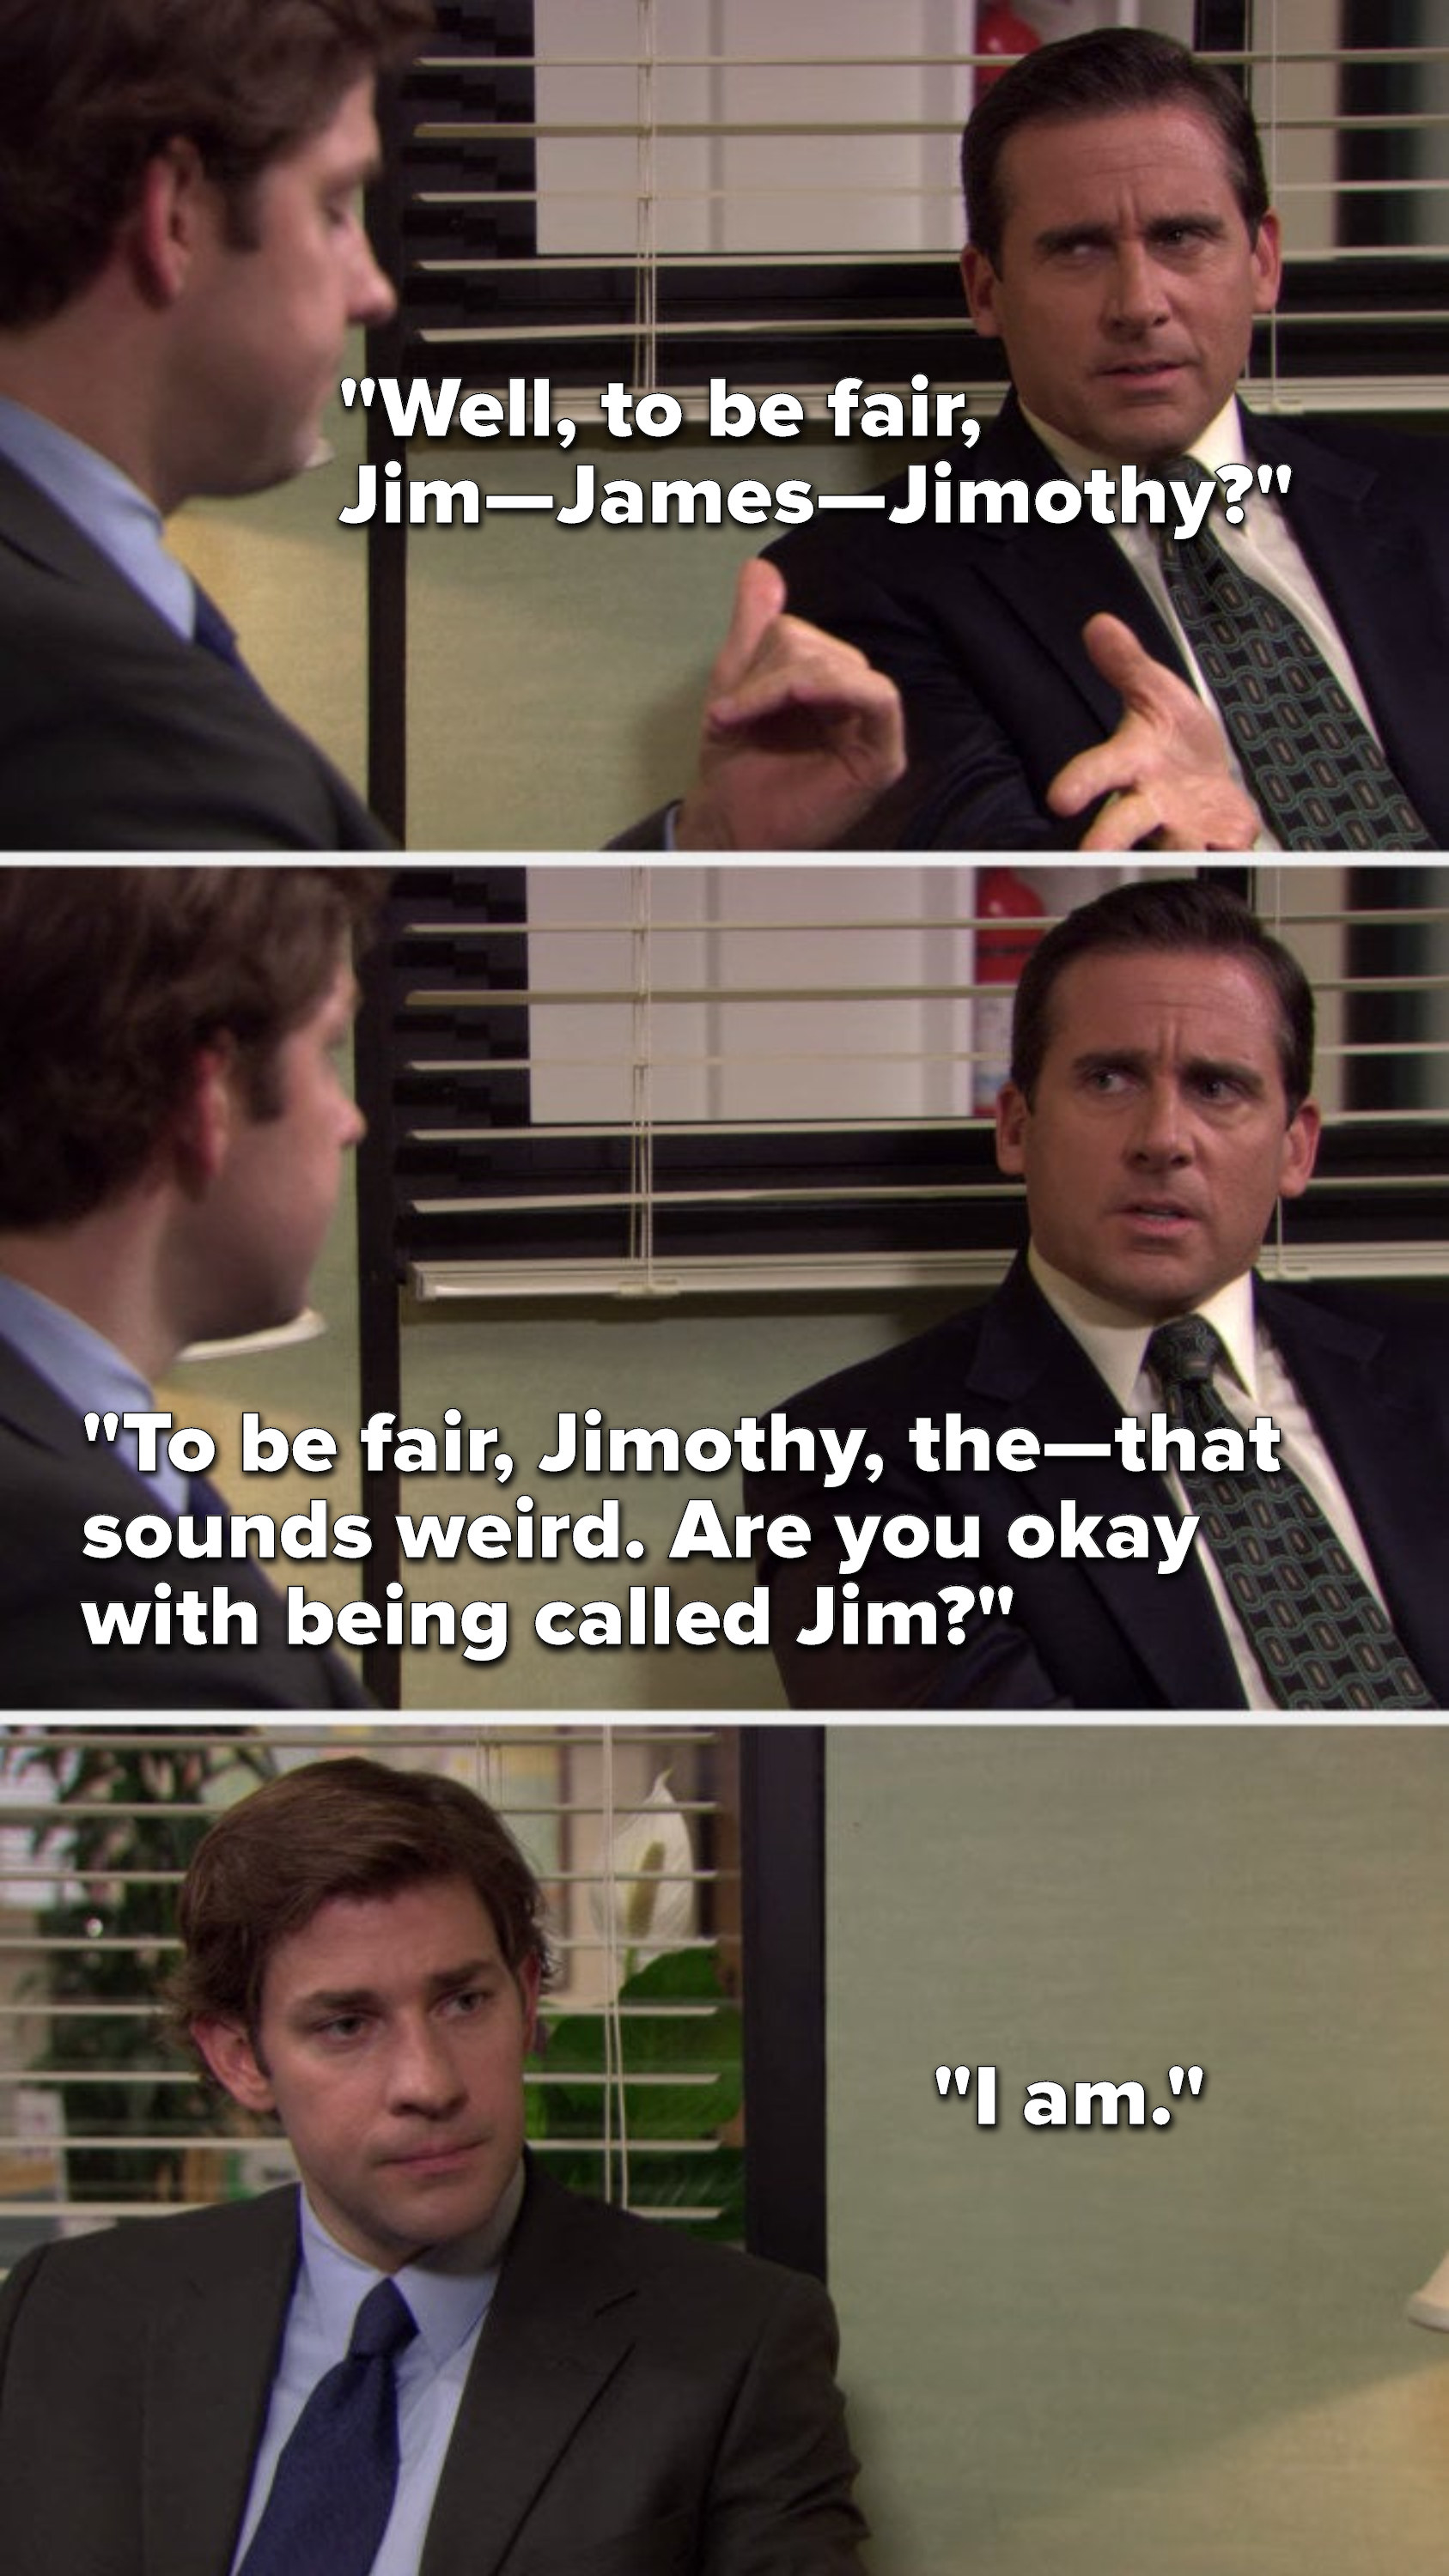 Michael says, &quot;Well, to be fair, Jim—James—Jimothy,&quot; Jim indicates yes for Jimothy, Michael says, &quot;To be fair, Jimothy, the—that sounds weird, are you okay with being called Jim,&quot; and Jim says &quot;I am&quot;